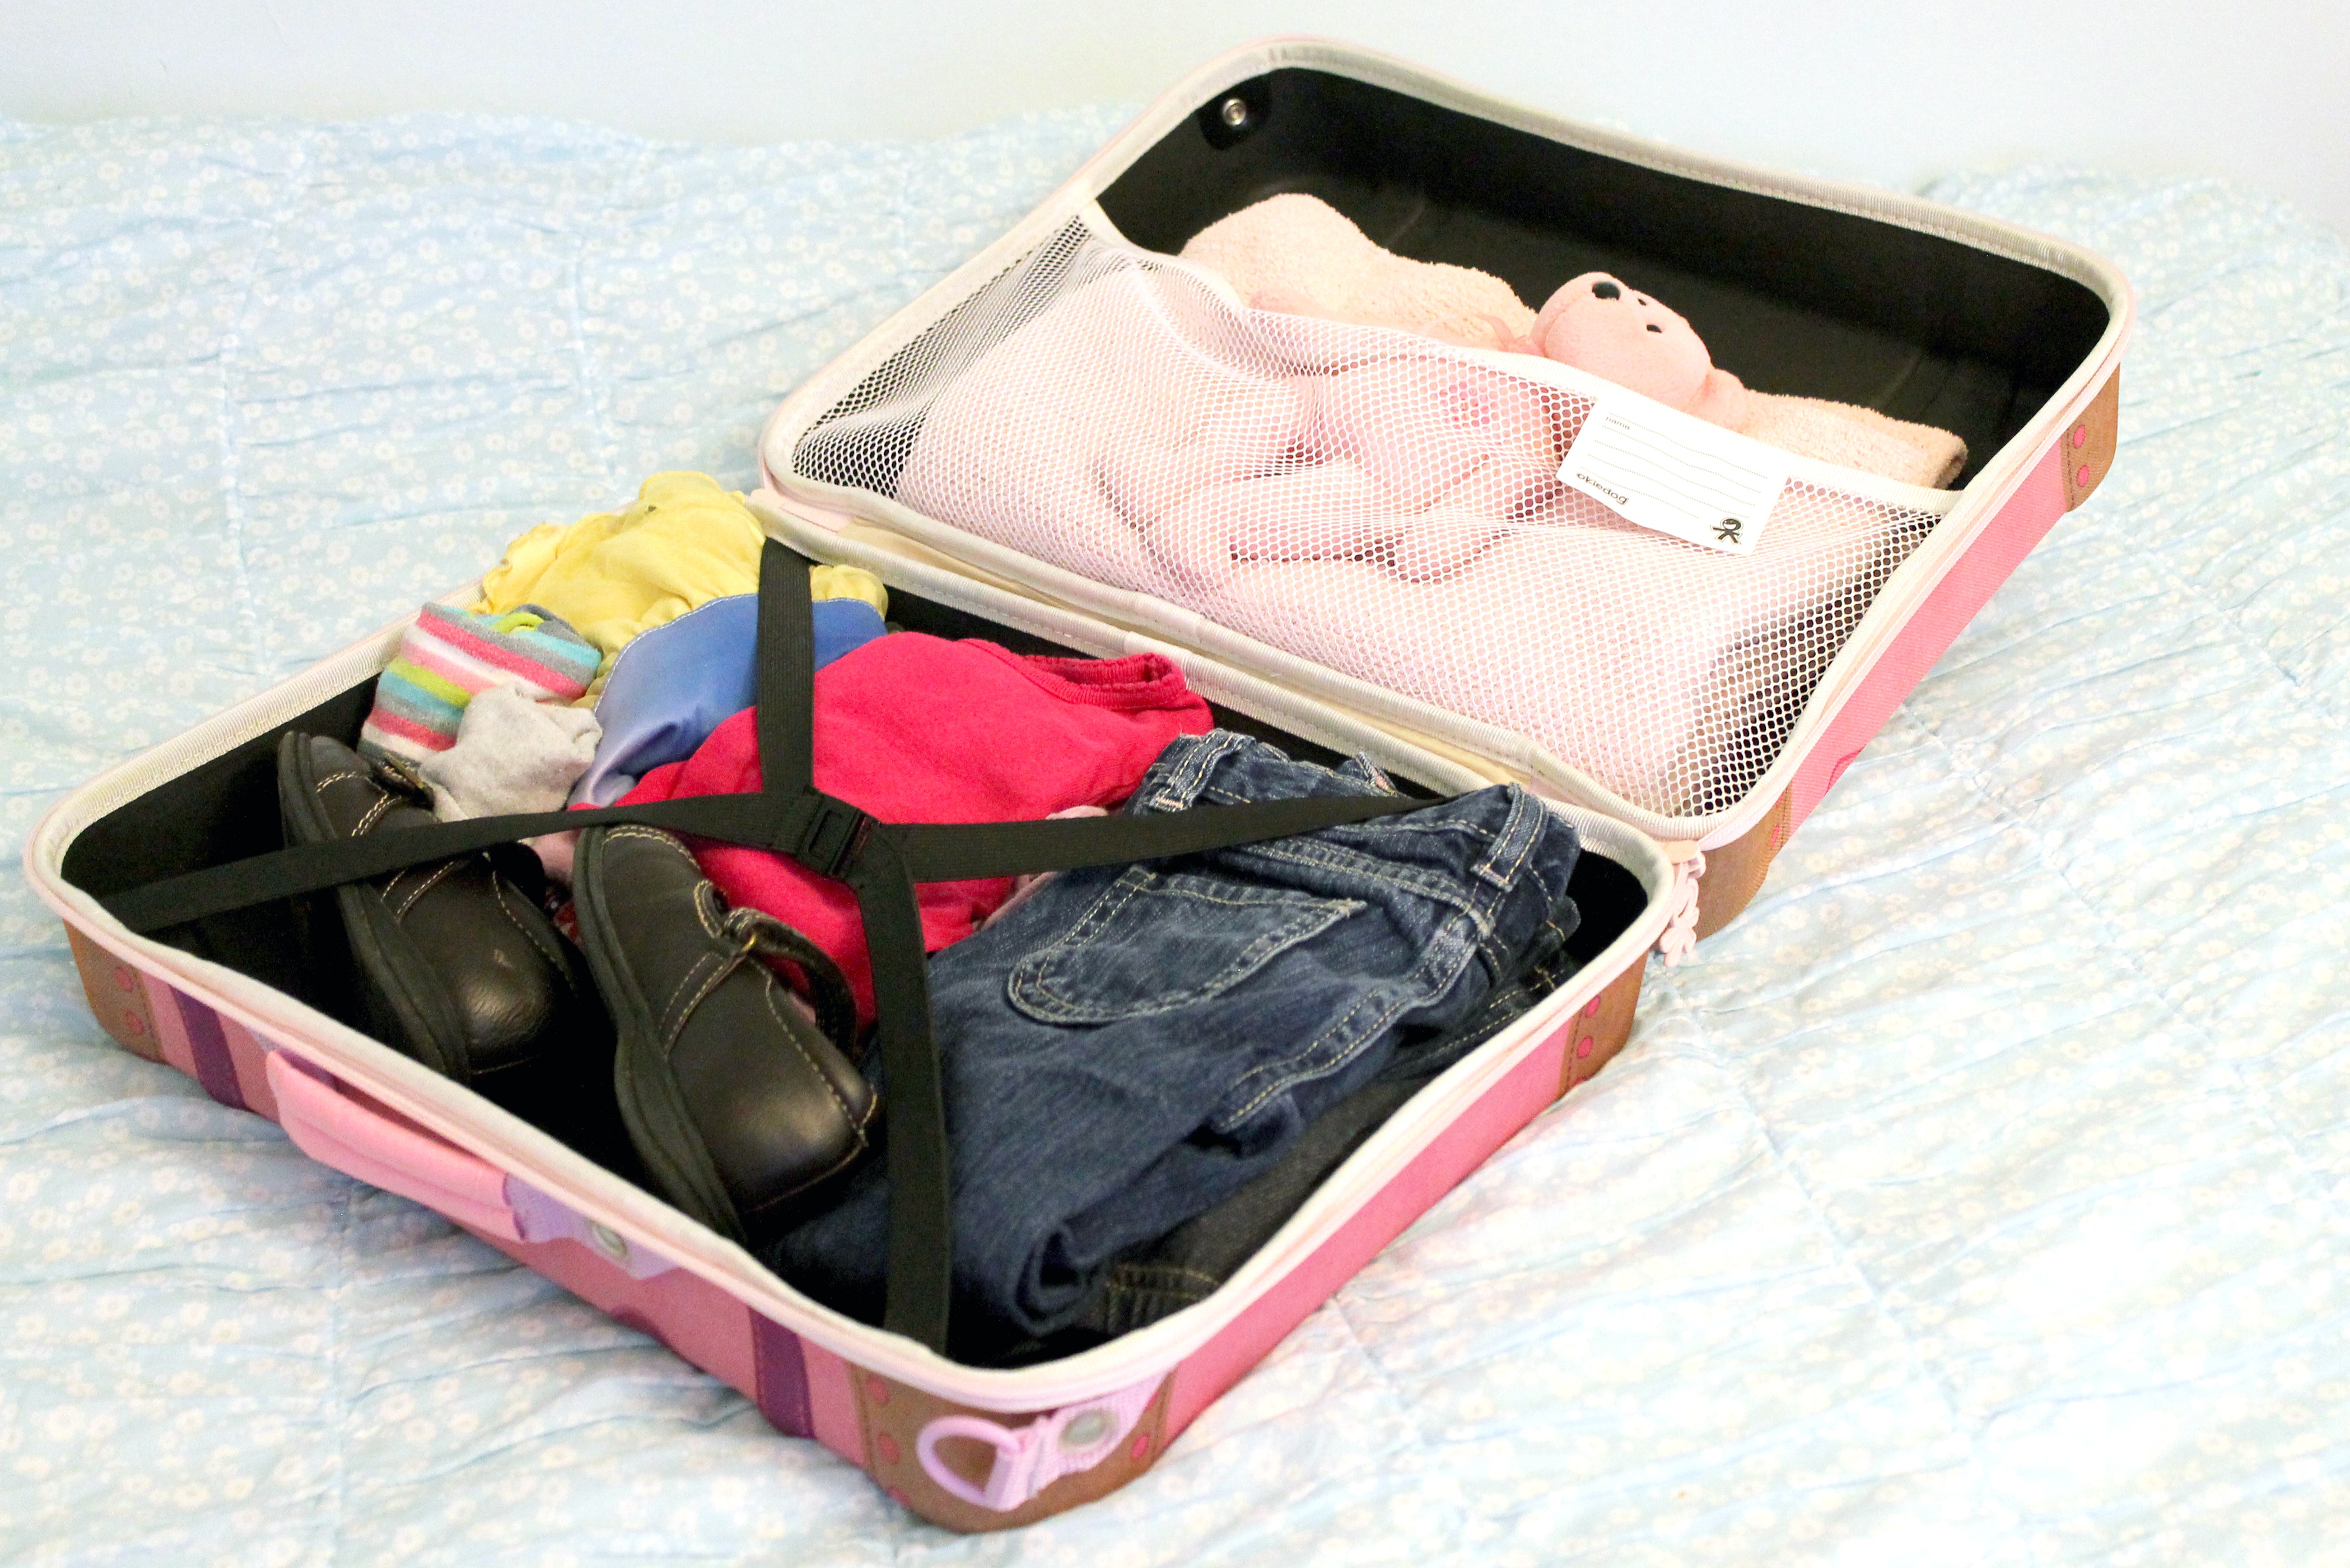 how to pack efficiently, pack up and go, best carry on luggage, how to pack a suitcase, space saver bags, packing hacks, travel suitcase, beach vacation packing list, how to fold clothes, rolling suitcase, best travel bag, how to use packing cubes, how to fold pants, where to buy luggage, how to pack a dress shirt, how to pack a carry on, vacation clothes